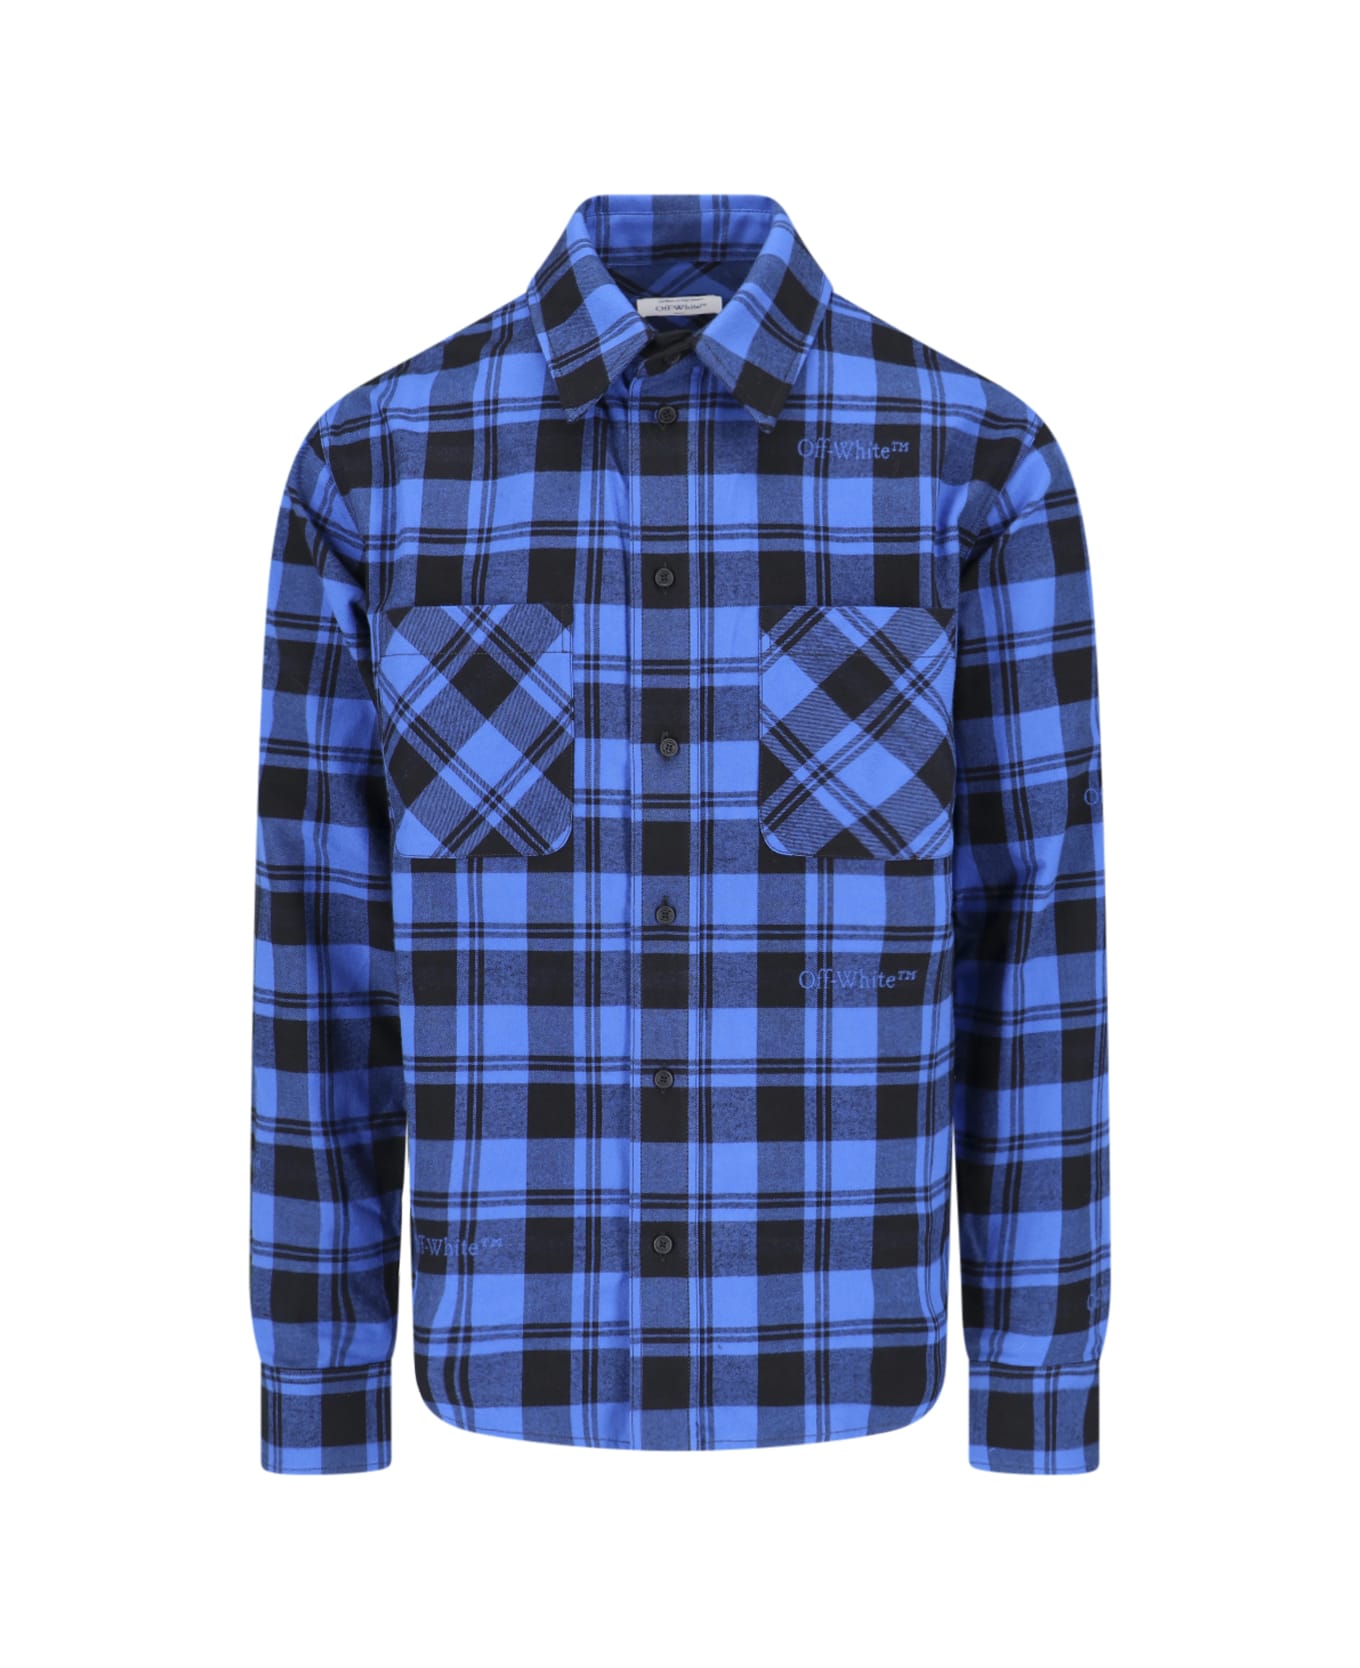 Off-White Checked Flannel Shirt - Blue